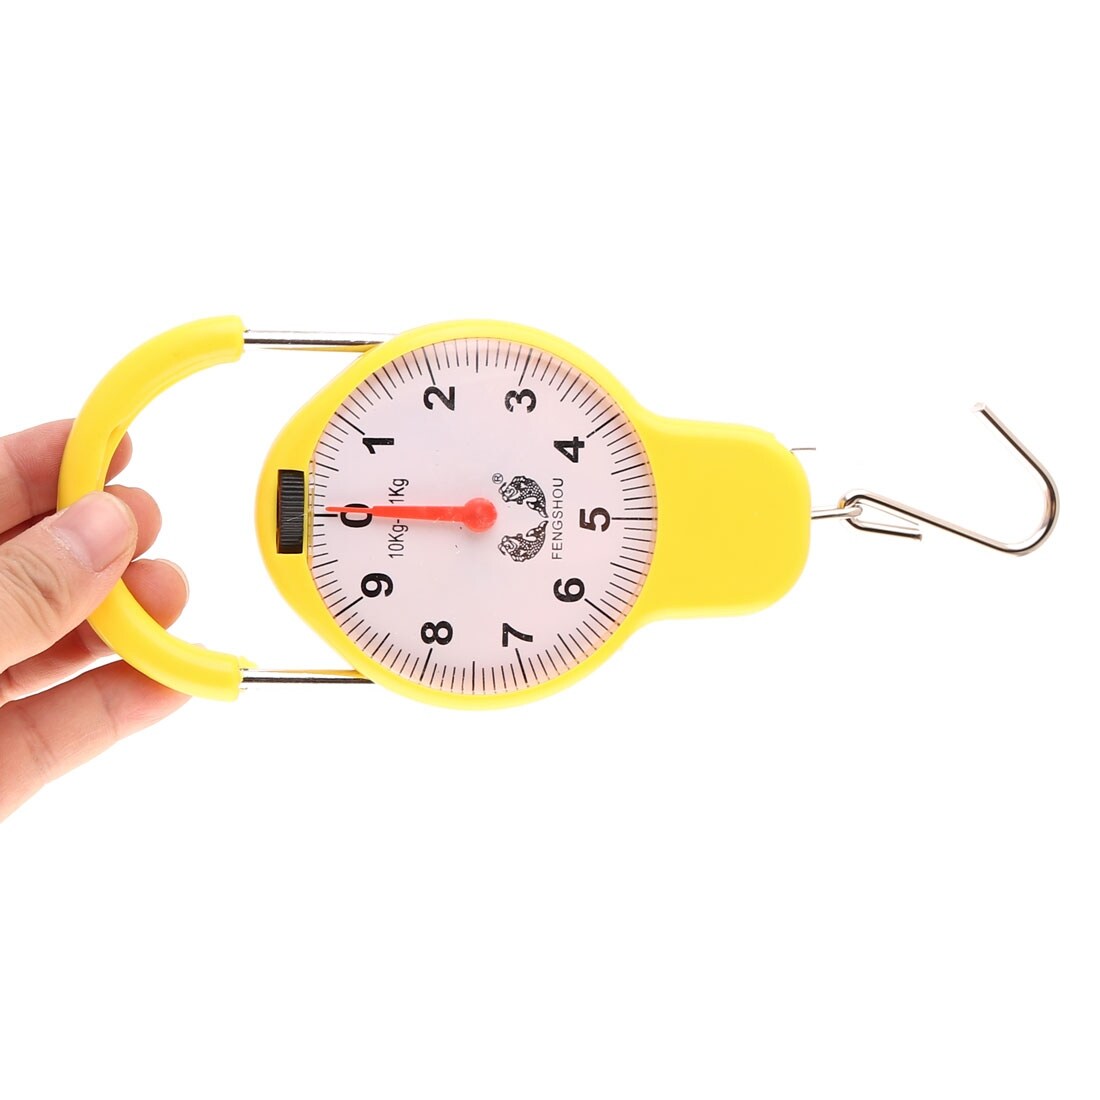 Fish Shape Round Dial Weight Analog Mechanical Hanging Scale 10kg - White,Yellow,Silver - 4.7" x 3" x 1"(L*W*T)